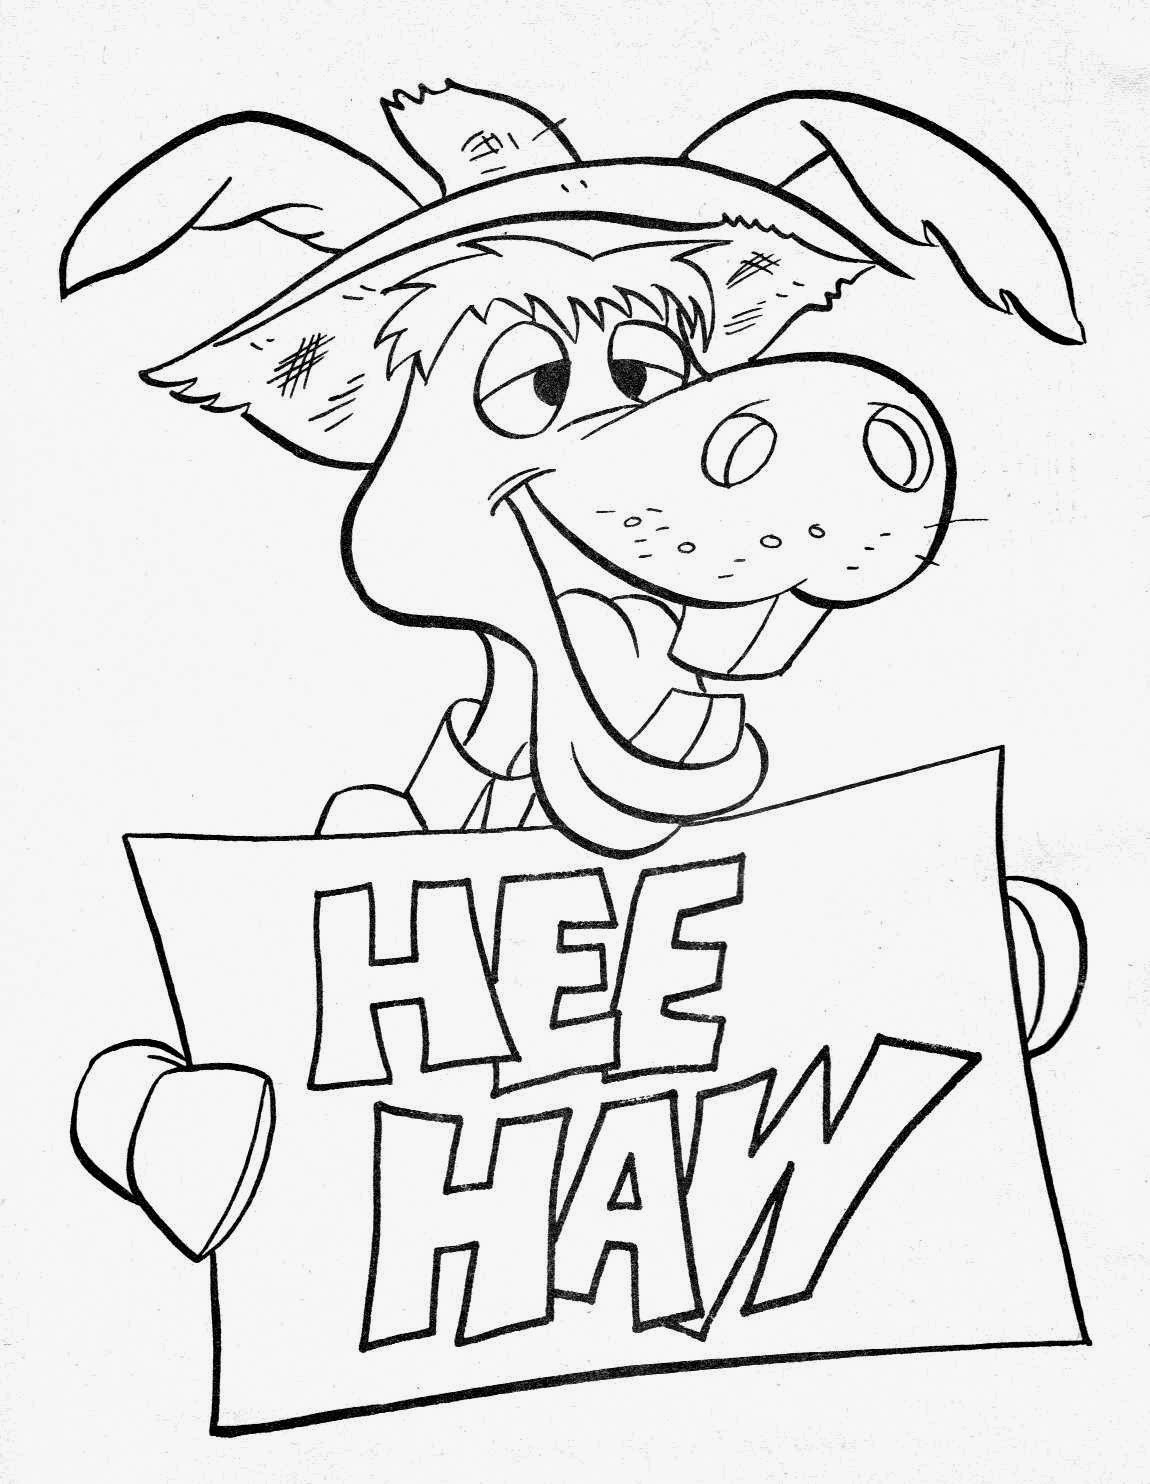 Download and everything else too: Hee Haw Coloring Book ('70)